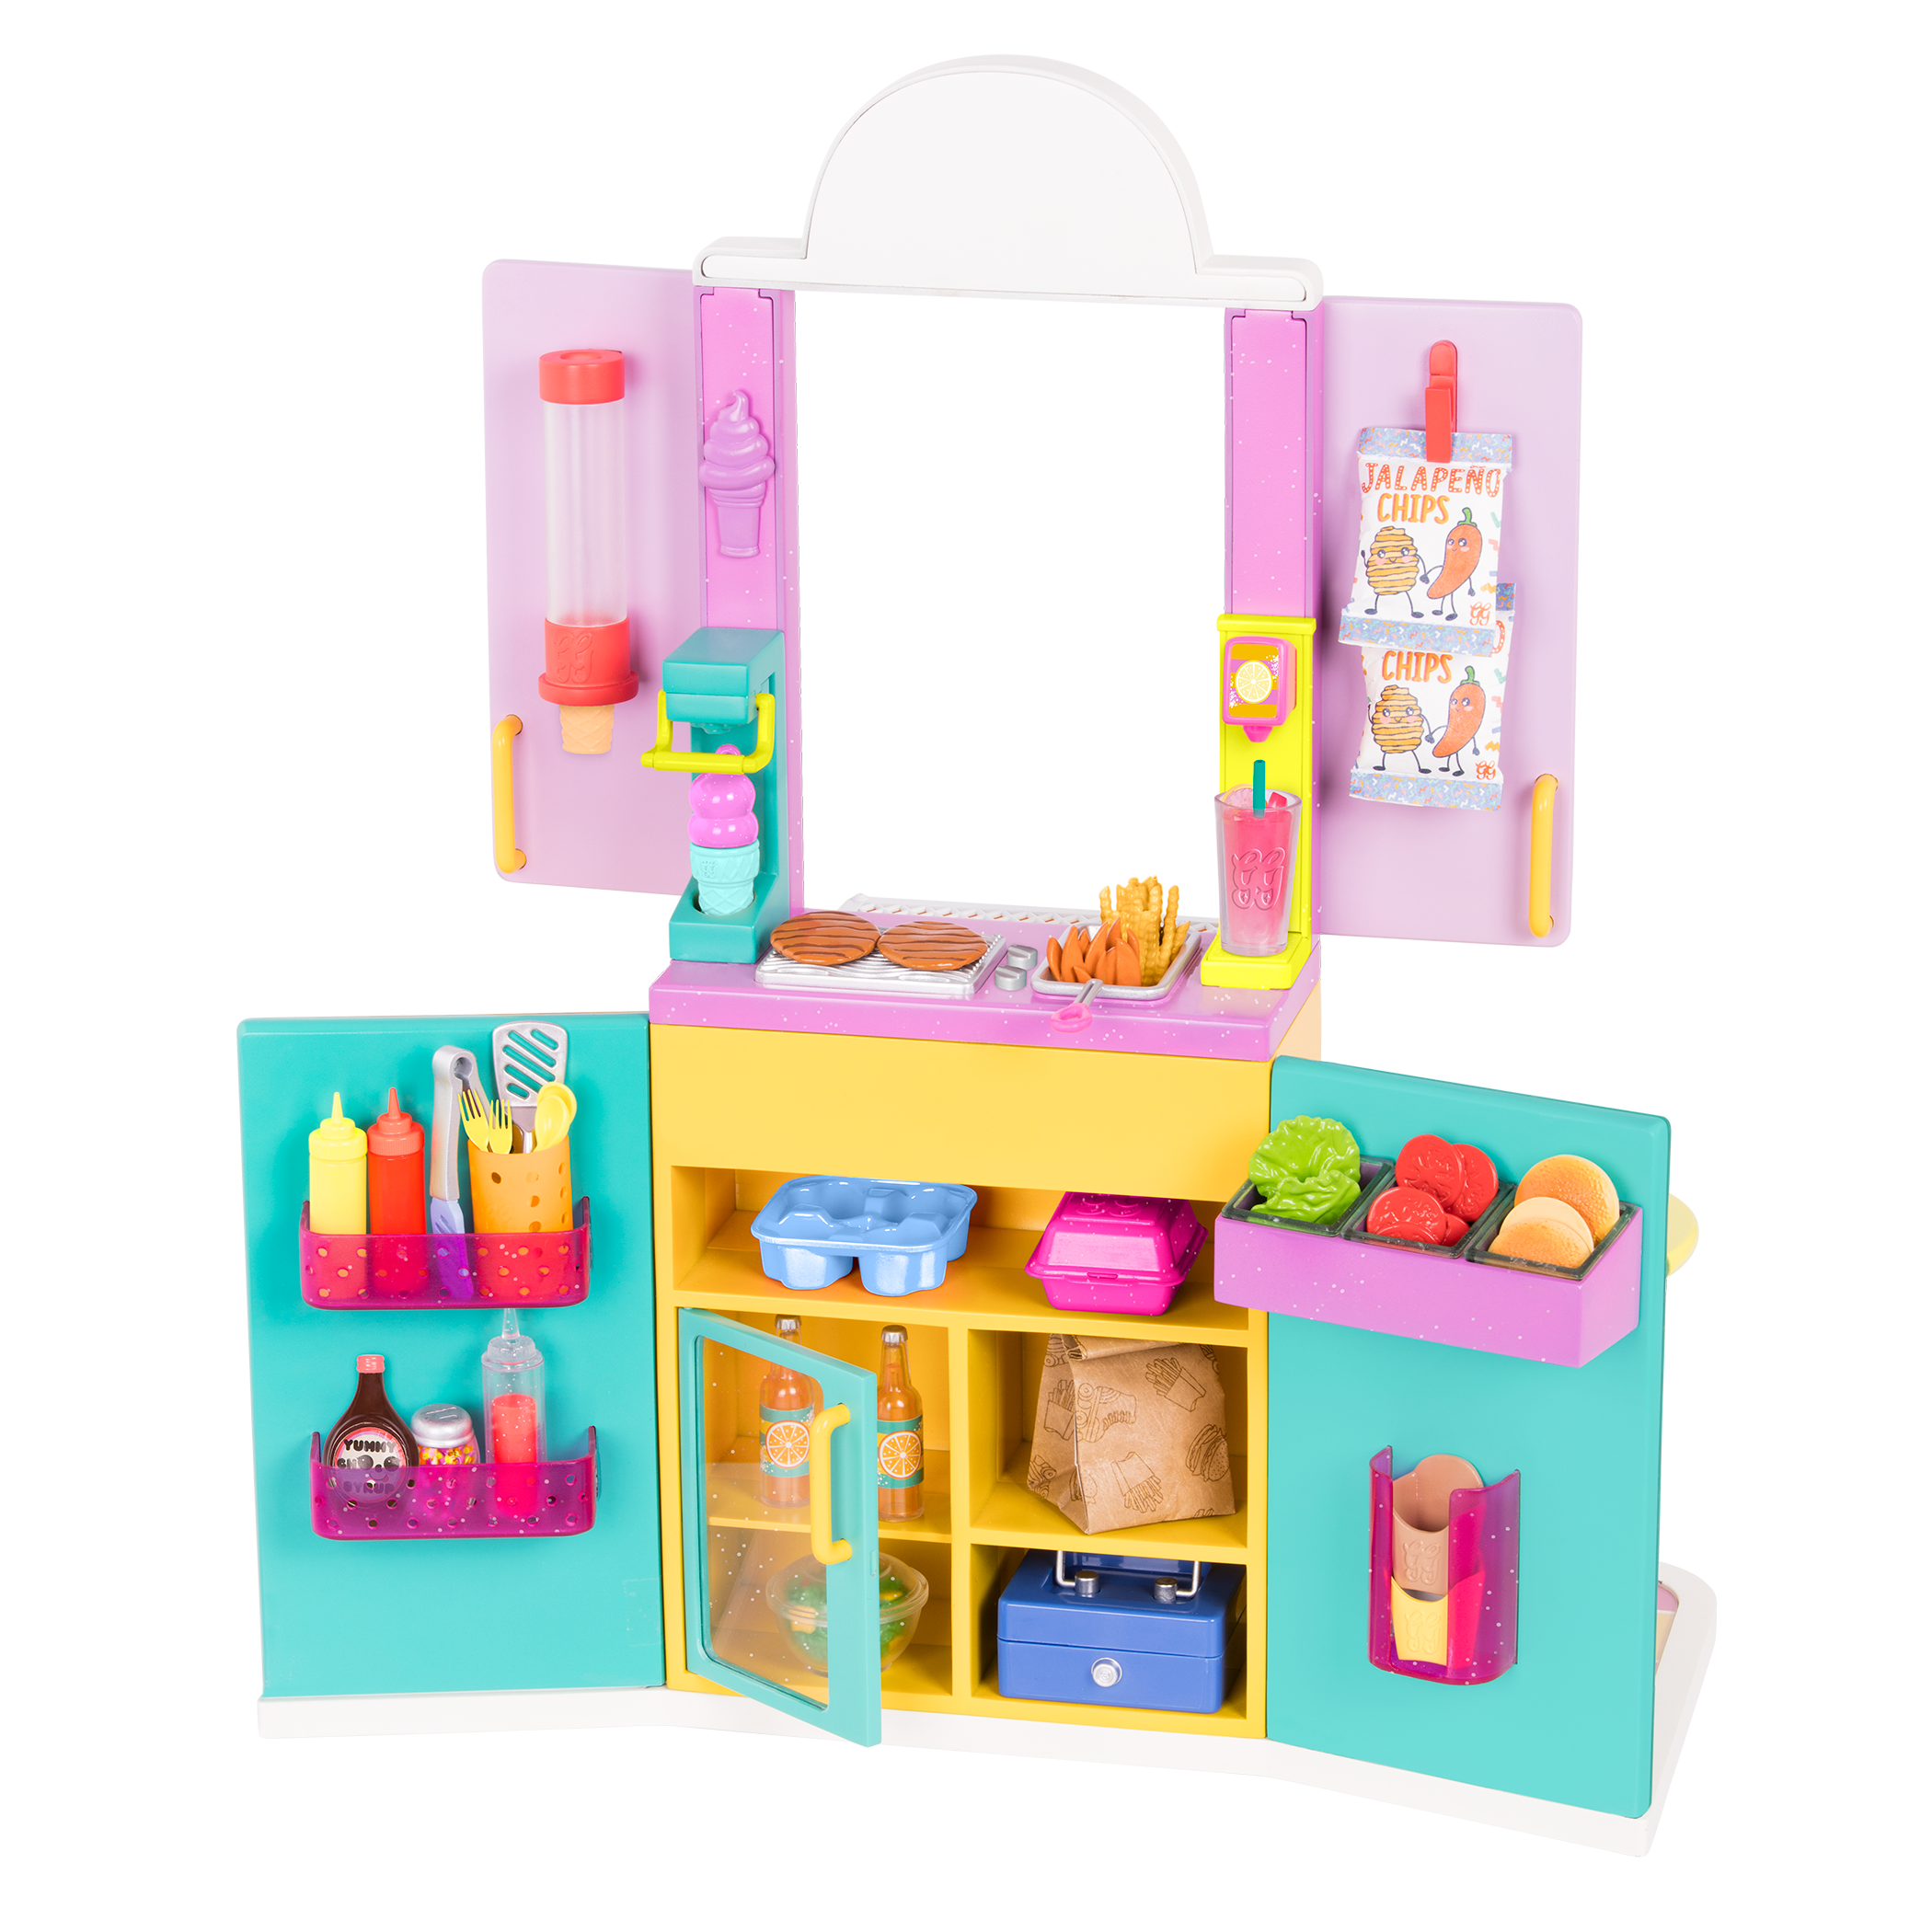 https://myglittergirls.com/wp-content/uploads/GG57117_Drive-thru-window-glitter-girls-dolls-14-inch-accessories-clothes-posable-poseable-open-storage-play-food.png